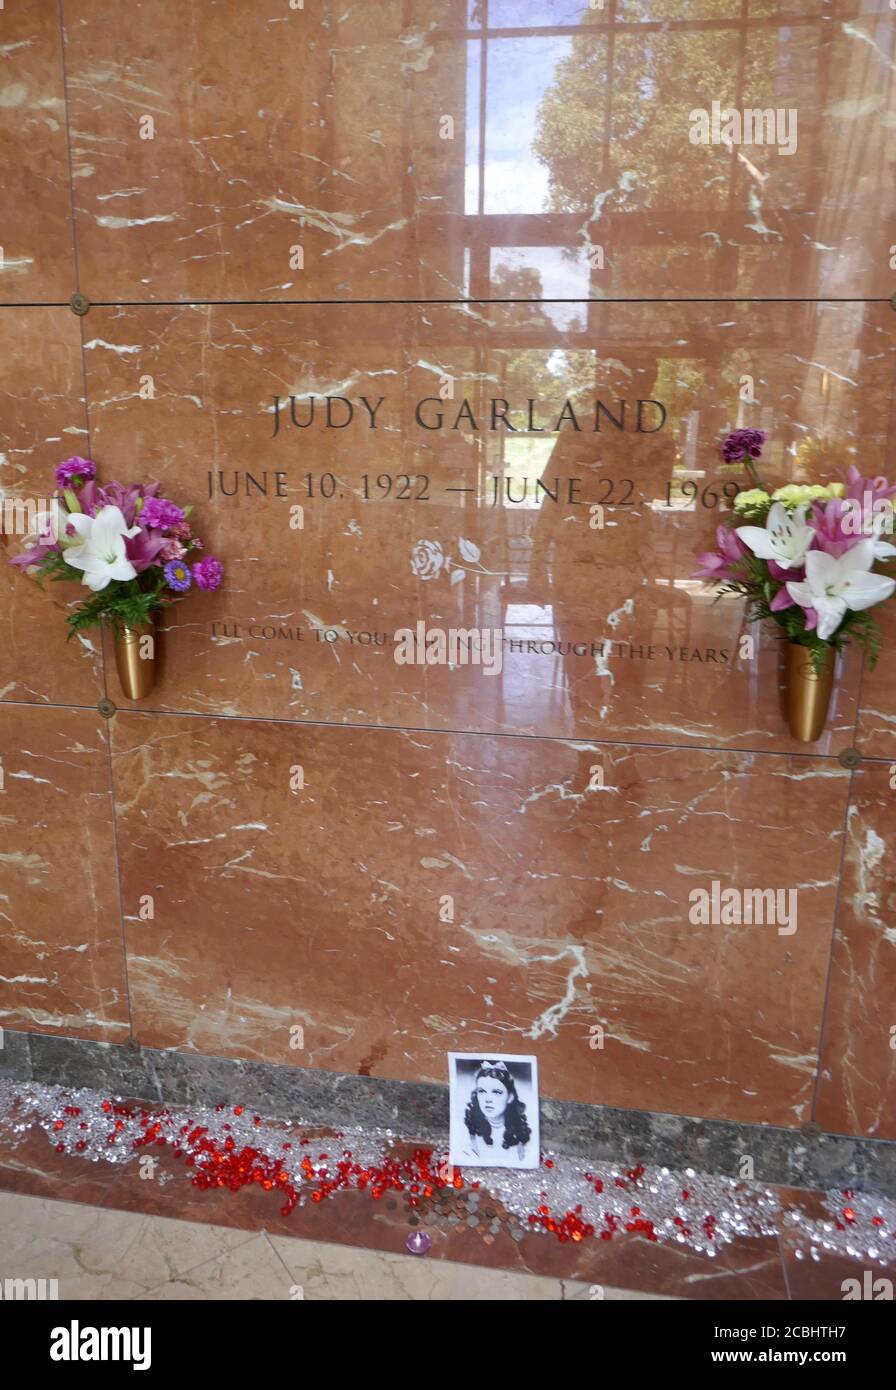 Hollywood, California, USA 13th August 2020 A general view of atmosphere of Judy  Garland Grave in Judy Garland Pavilion at Hollywood Forever Cemetery on  August 13, 2020 in Hollywood, California, USA. Photo